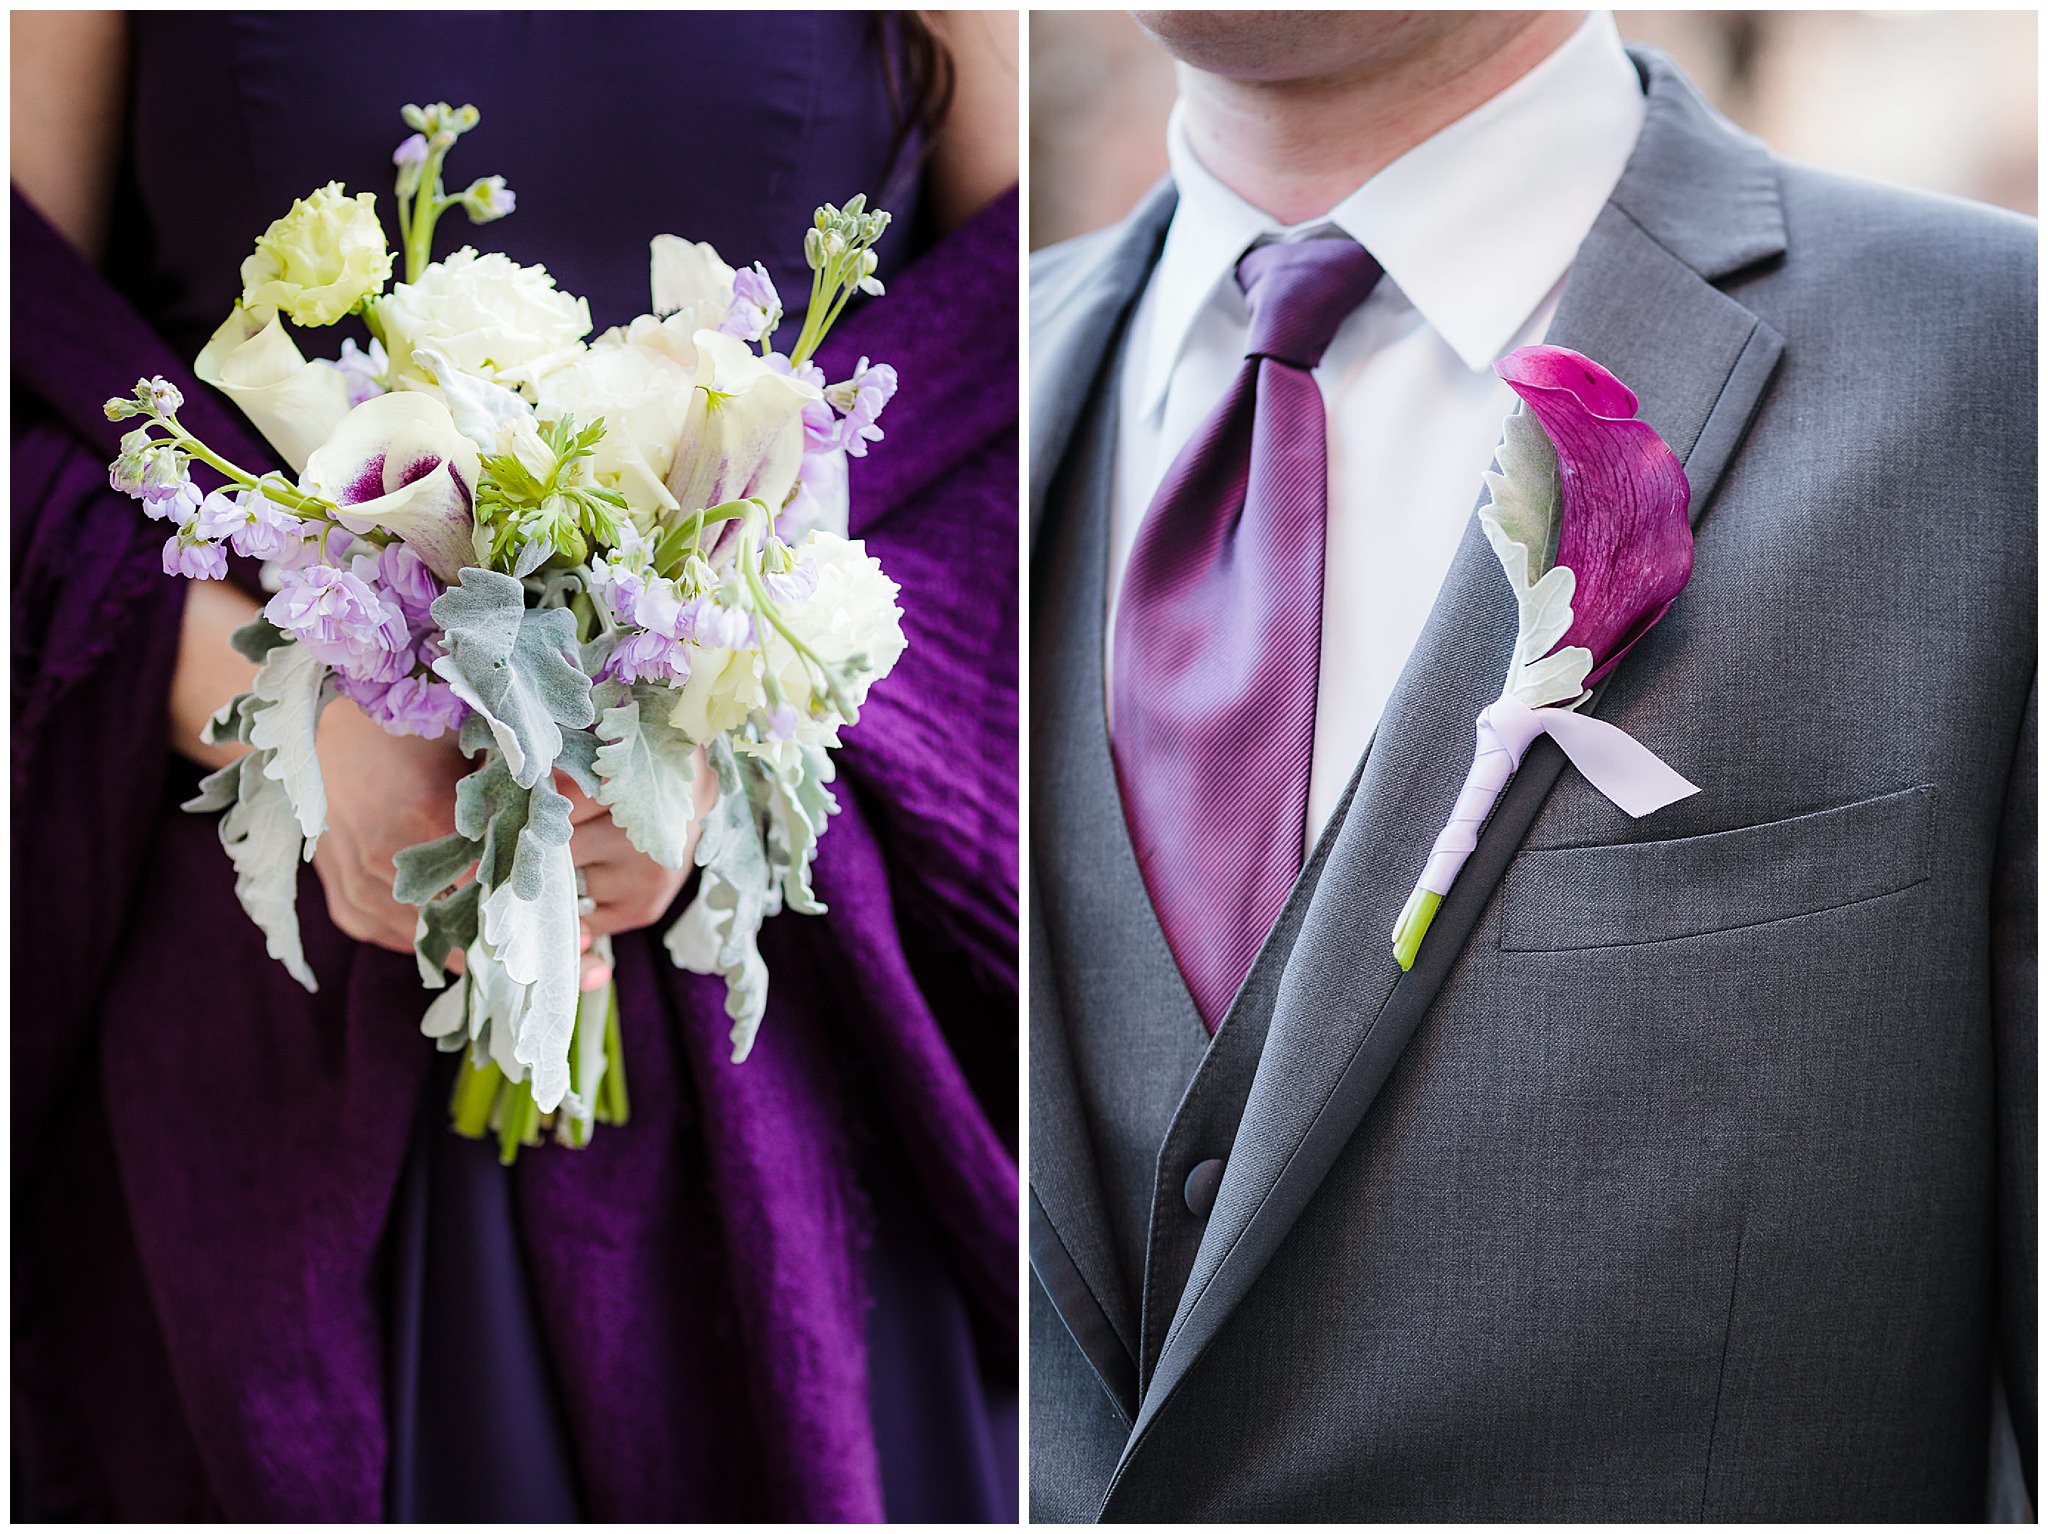 Bridesmaid's bouquet and groomsman's boutonniere by Holly Hanna Floral in Pittsburgh, PA